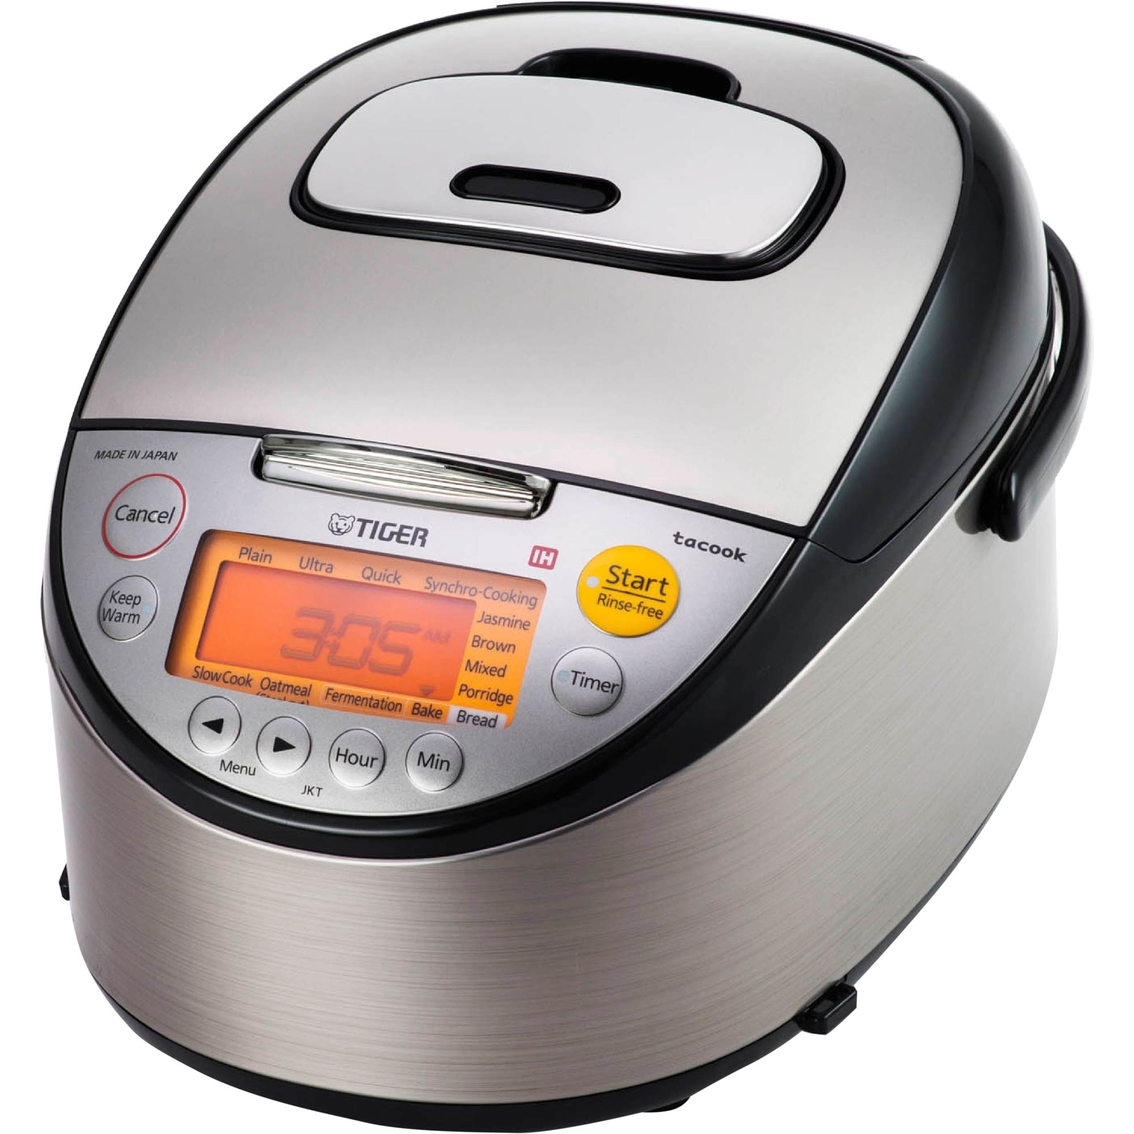 Tiger Stainless Steel 10 Cup Rice Cooker With Slow Cooker And Bread Tiger Stainless Steel Rice Cooker